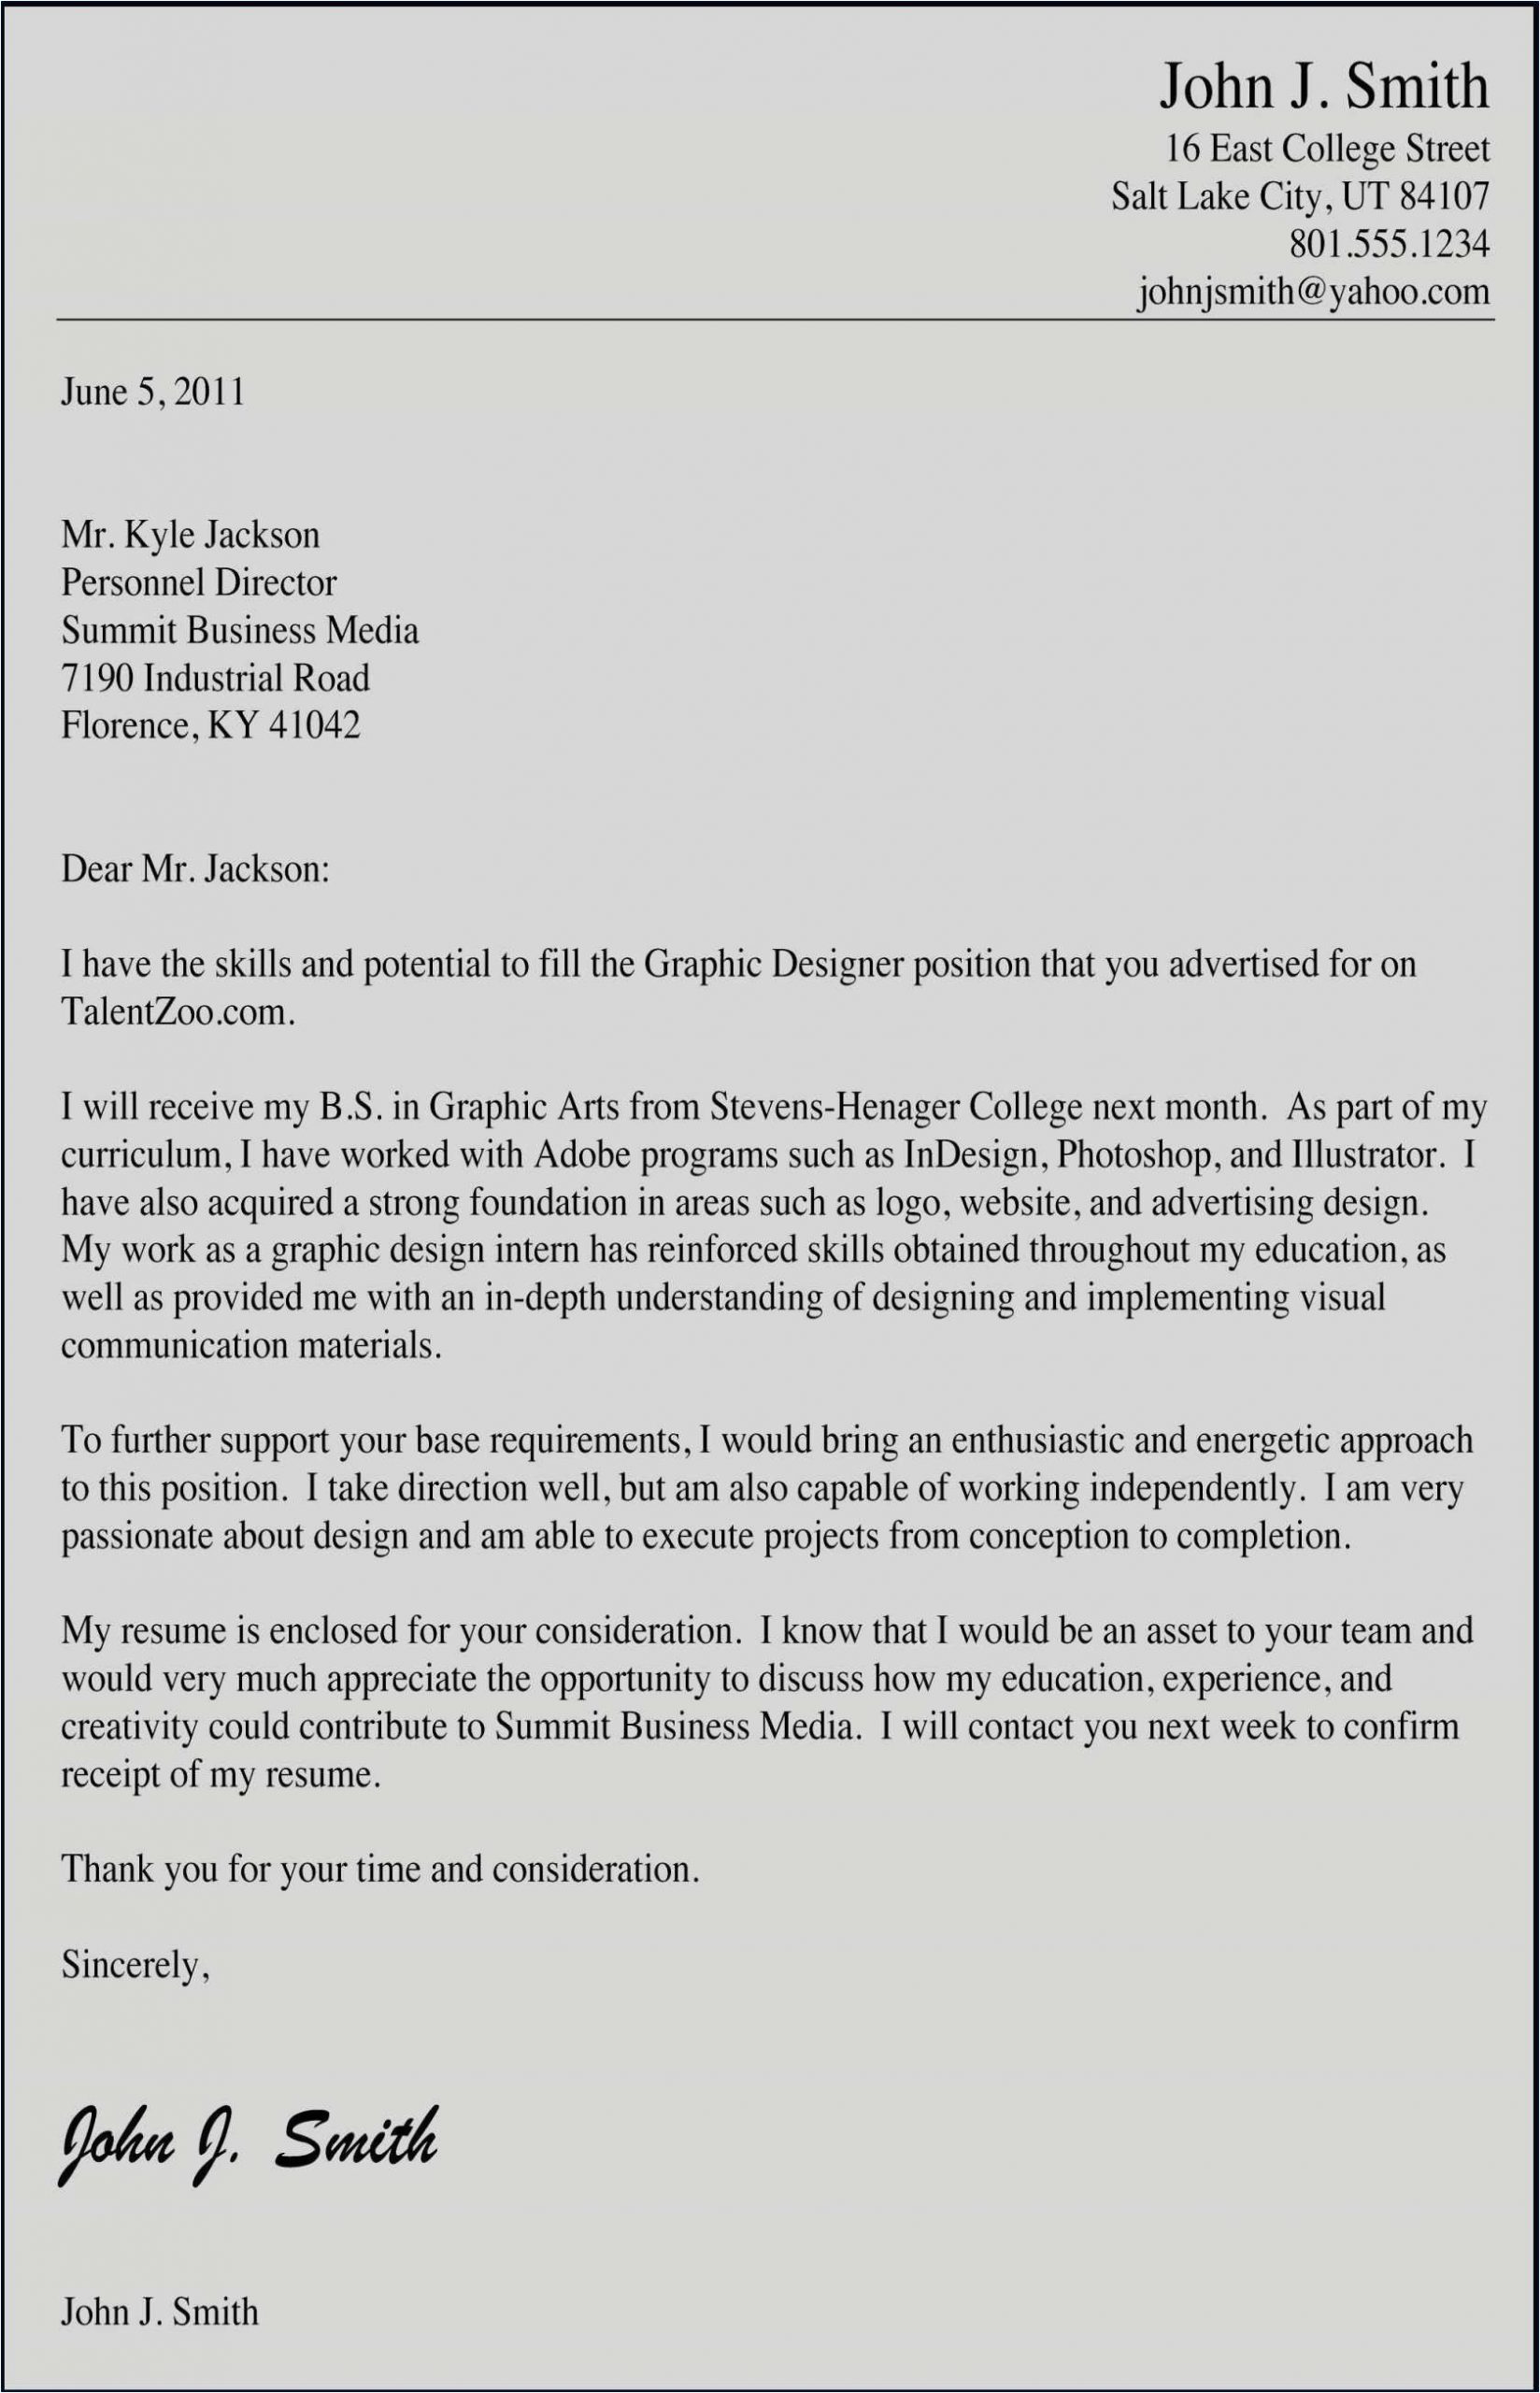 Sample Cover Letter with attached Resume attached is A Copy My Resume Awesome Unique Job